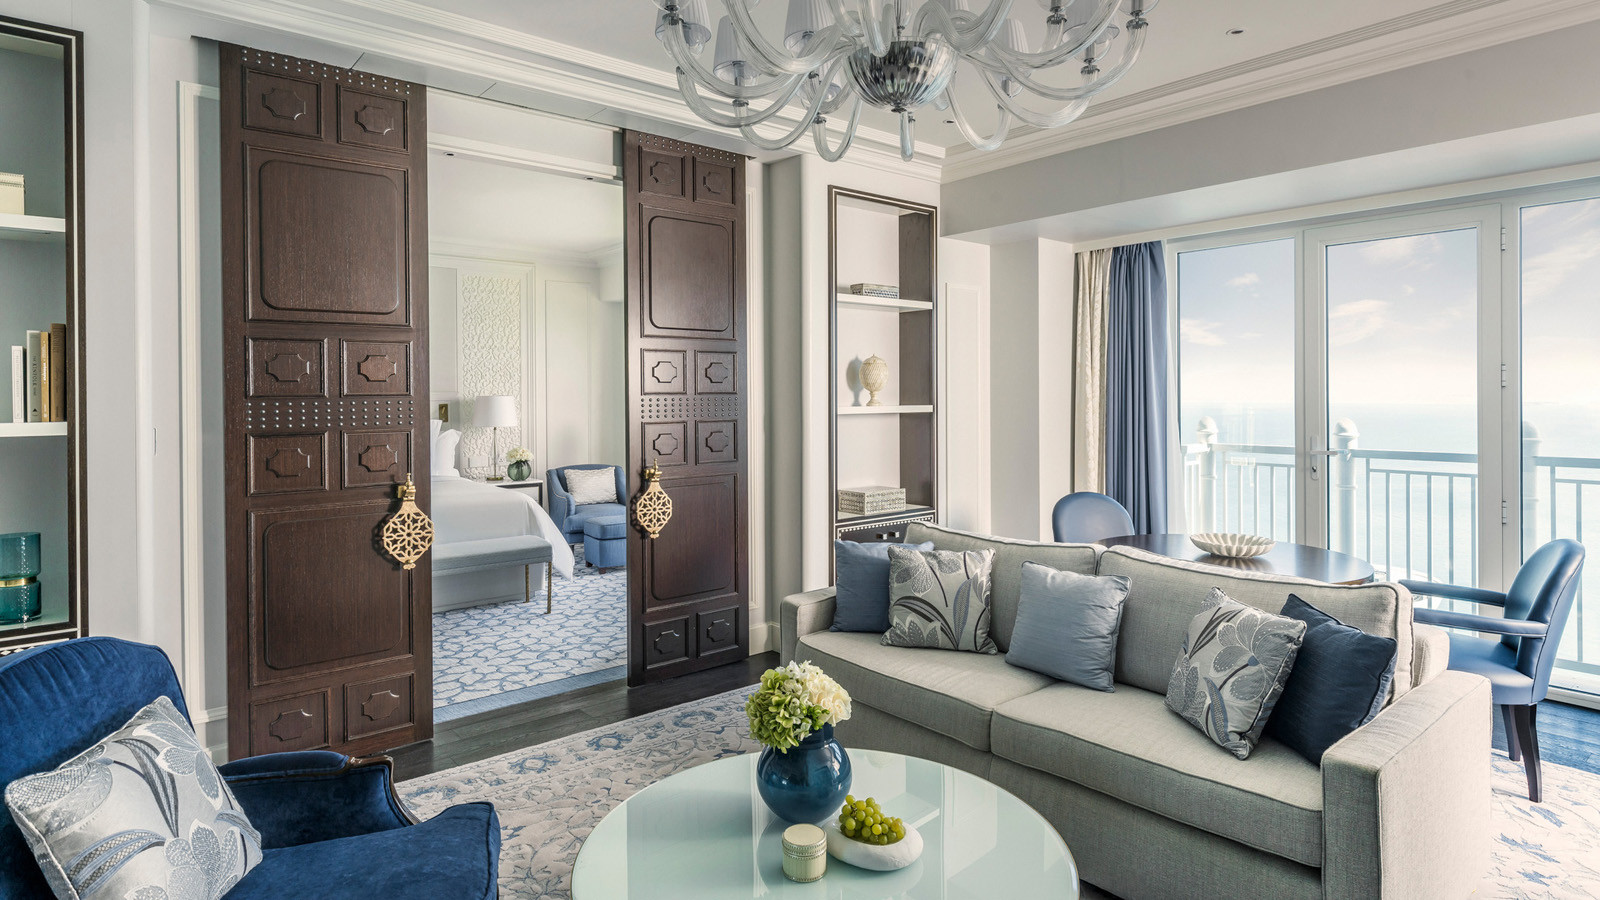 news-main-four-seasons-hotel-doha-unveils-complete-redesign-by-pierre-yves-rochon.1588159616.jpg